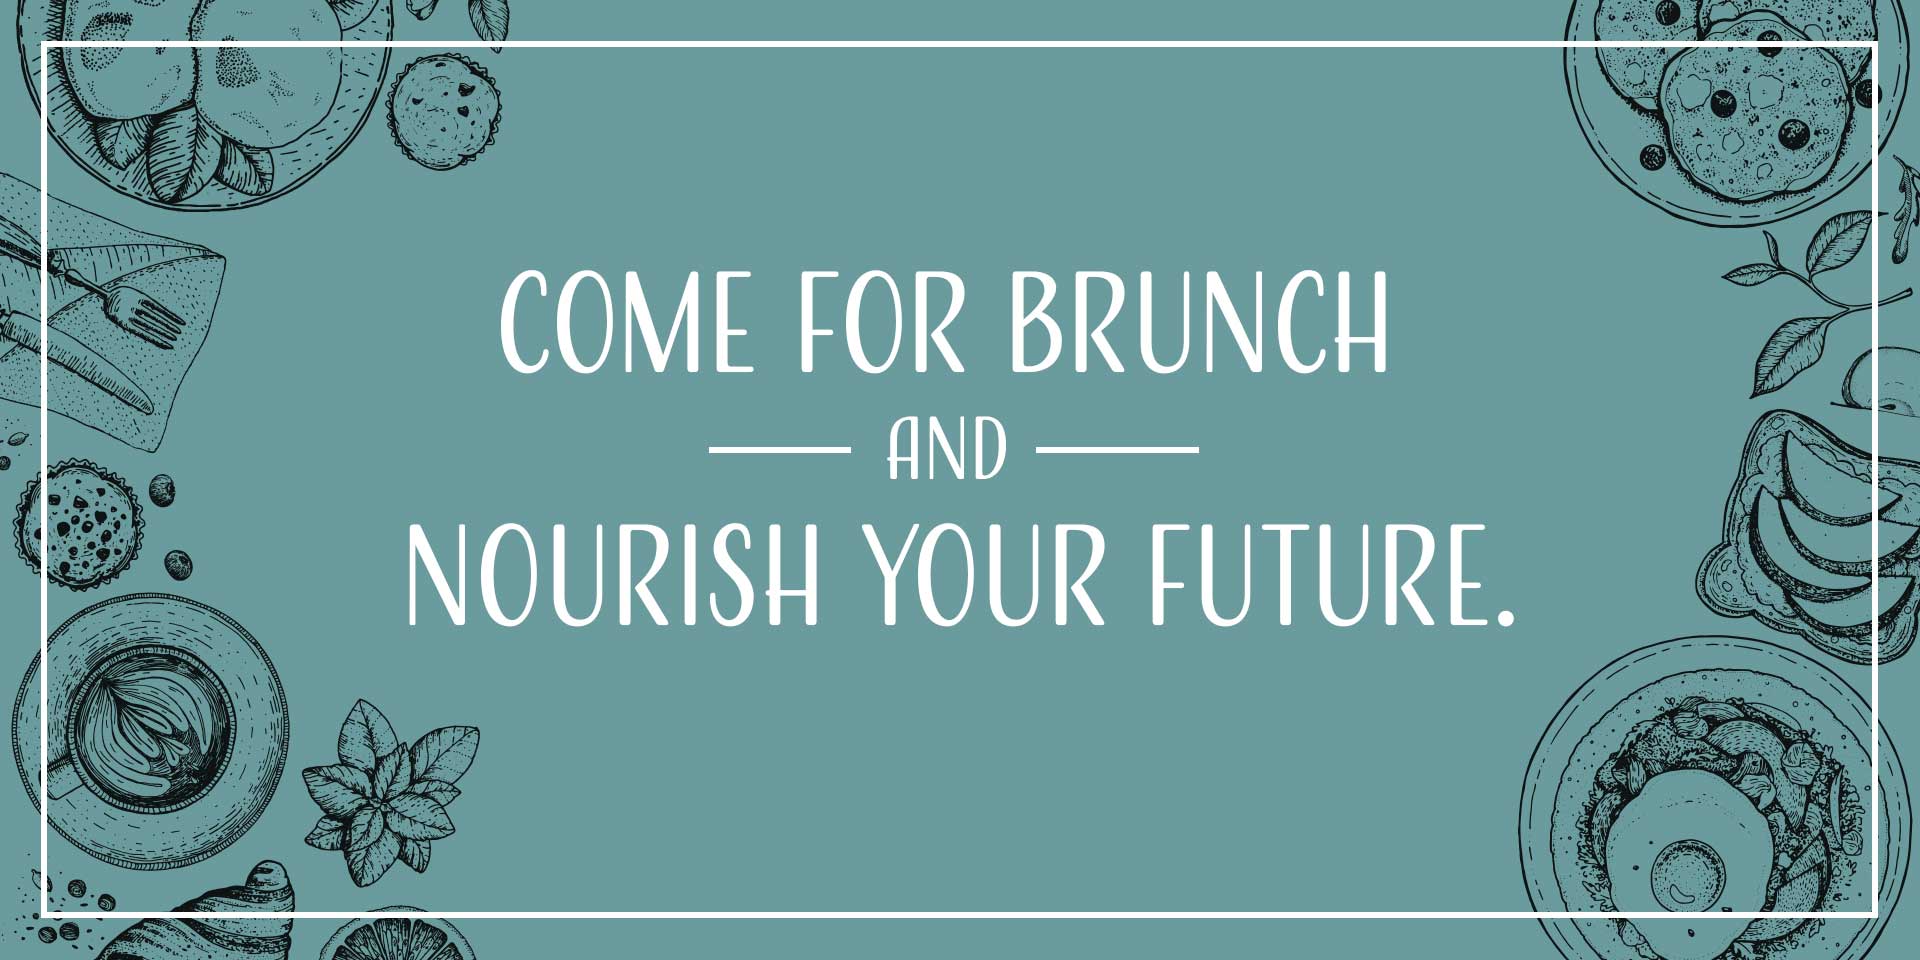 Come for brunch and nourish your future.